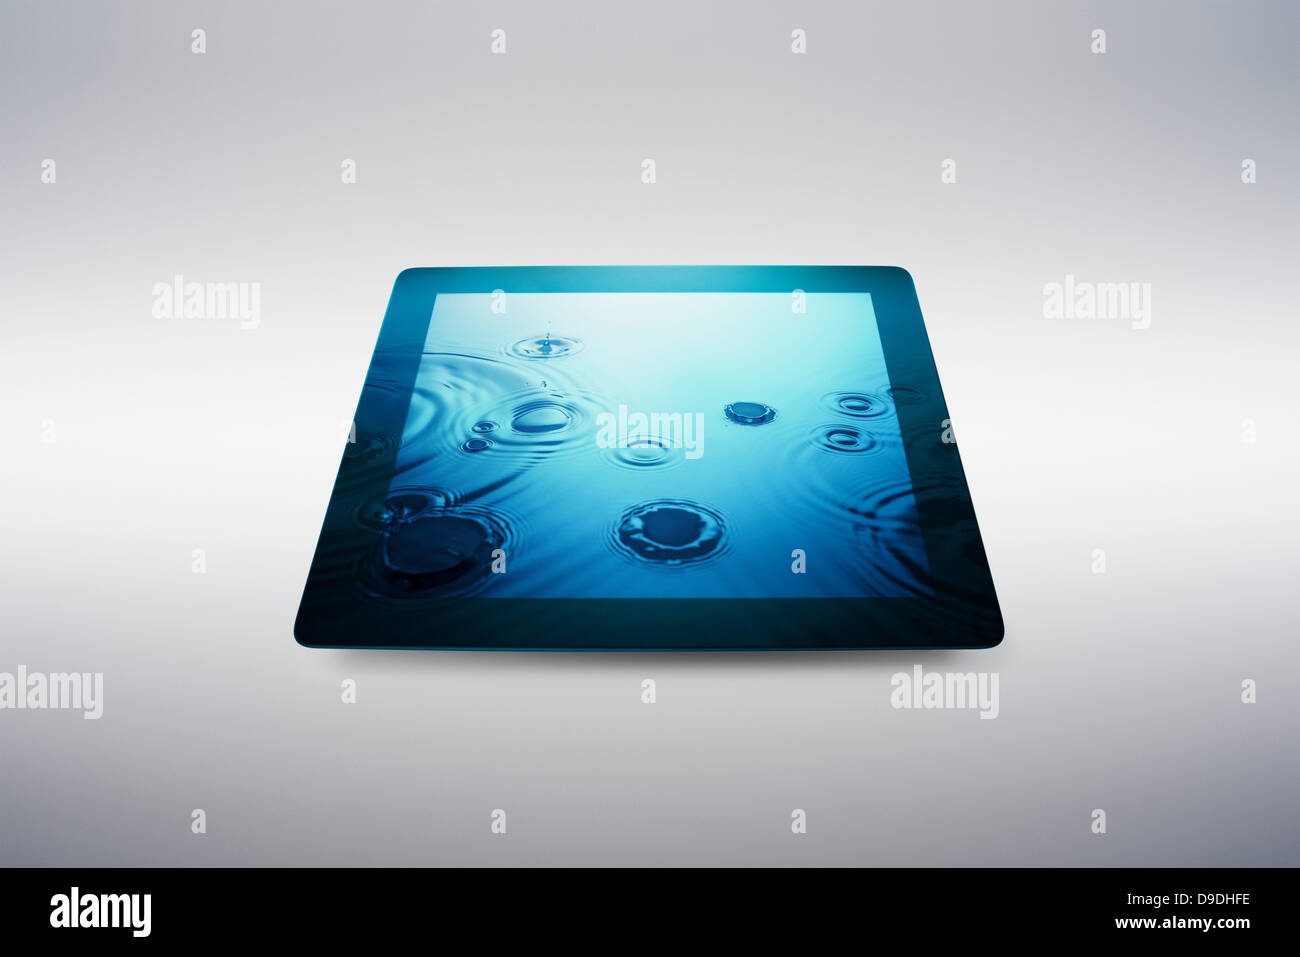 Digital tablet with water drop effect on screen Stock Photo